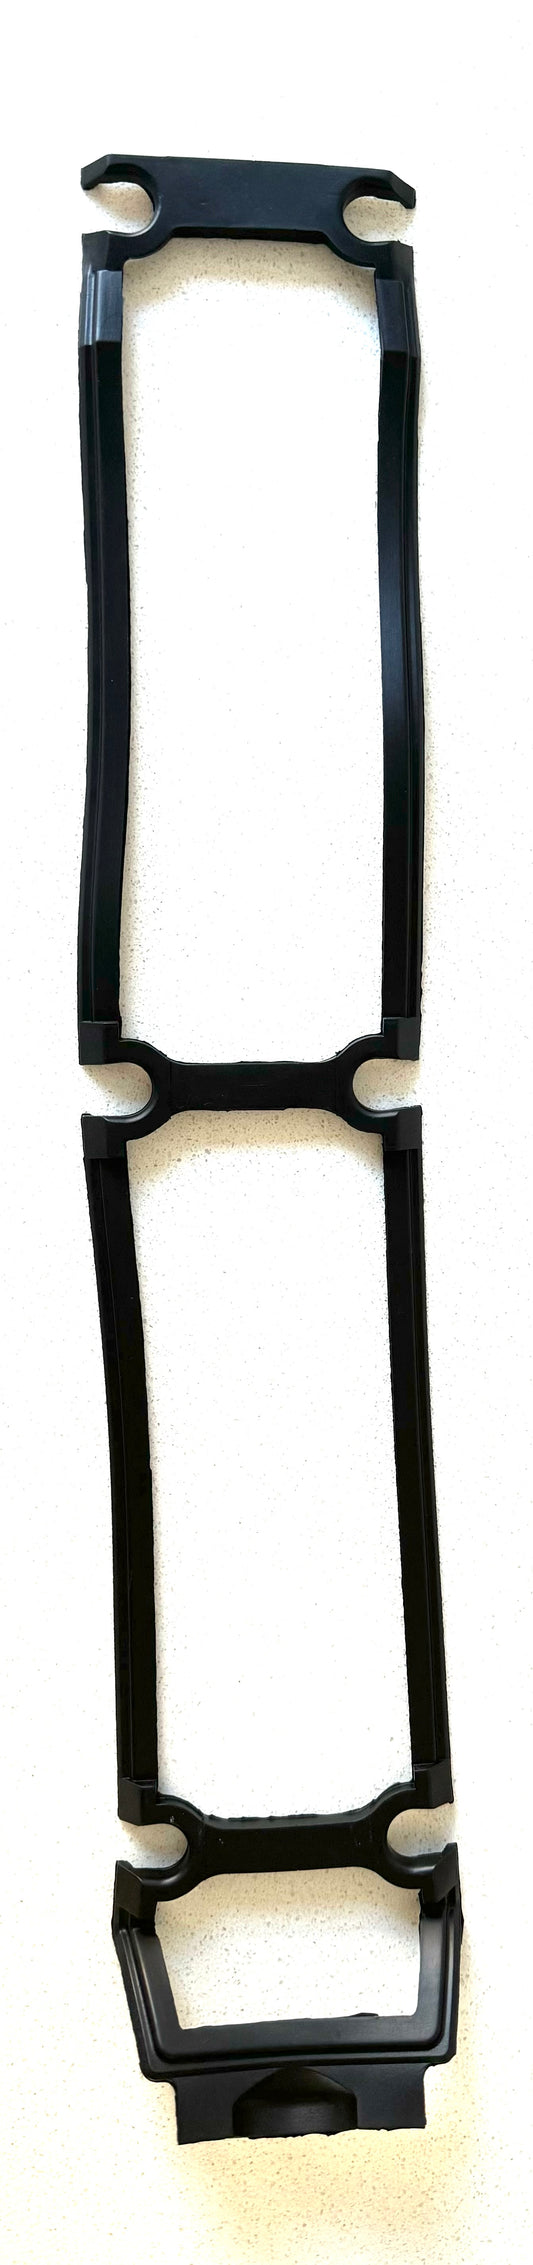 4AGE 16V Valley cover gasket